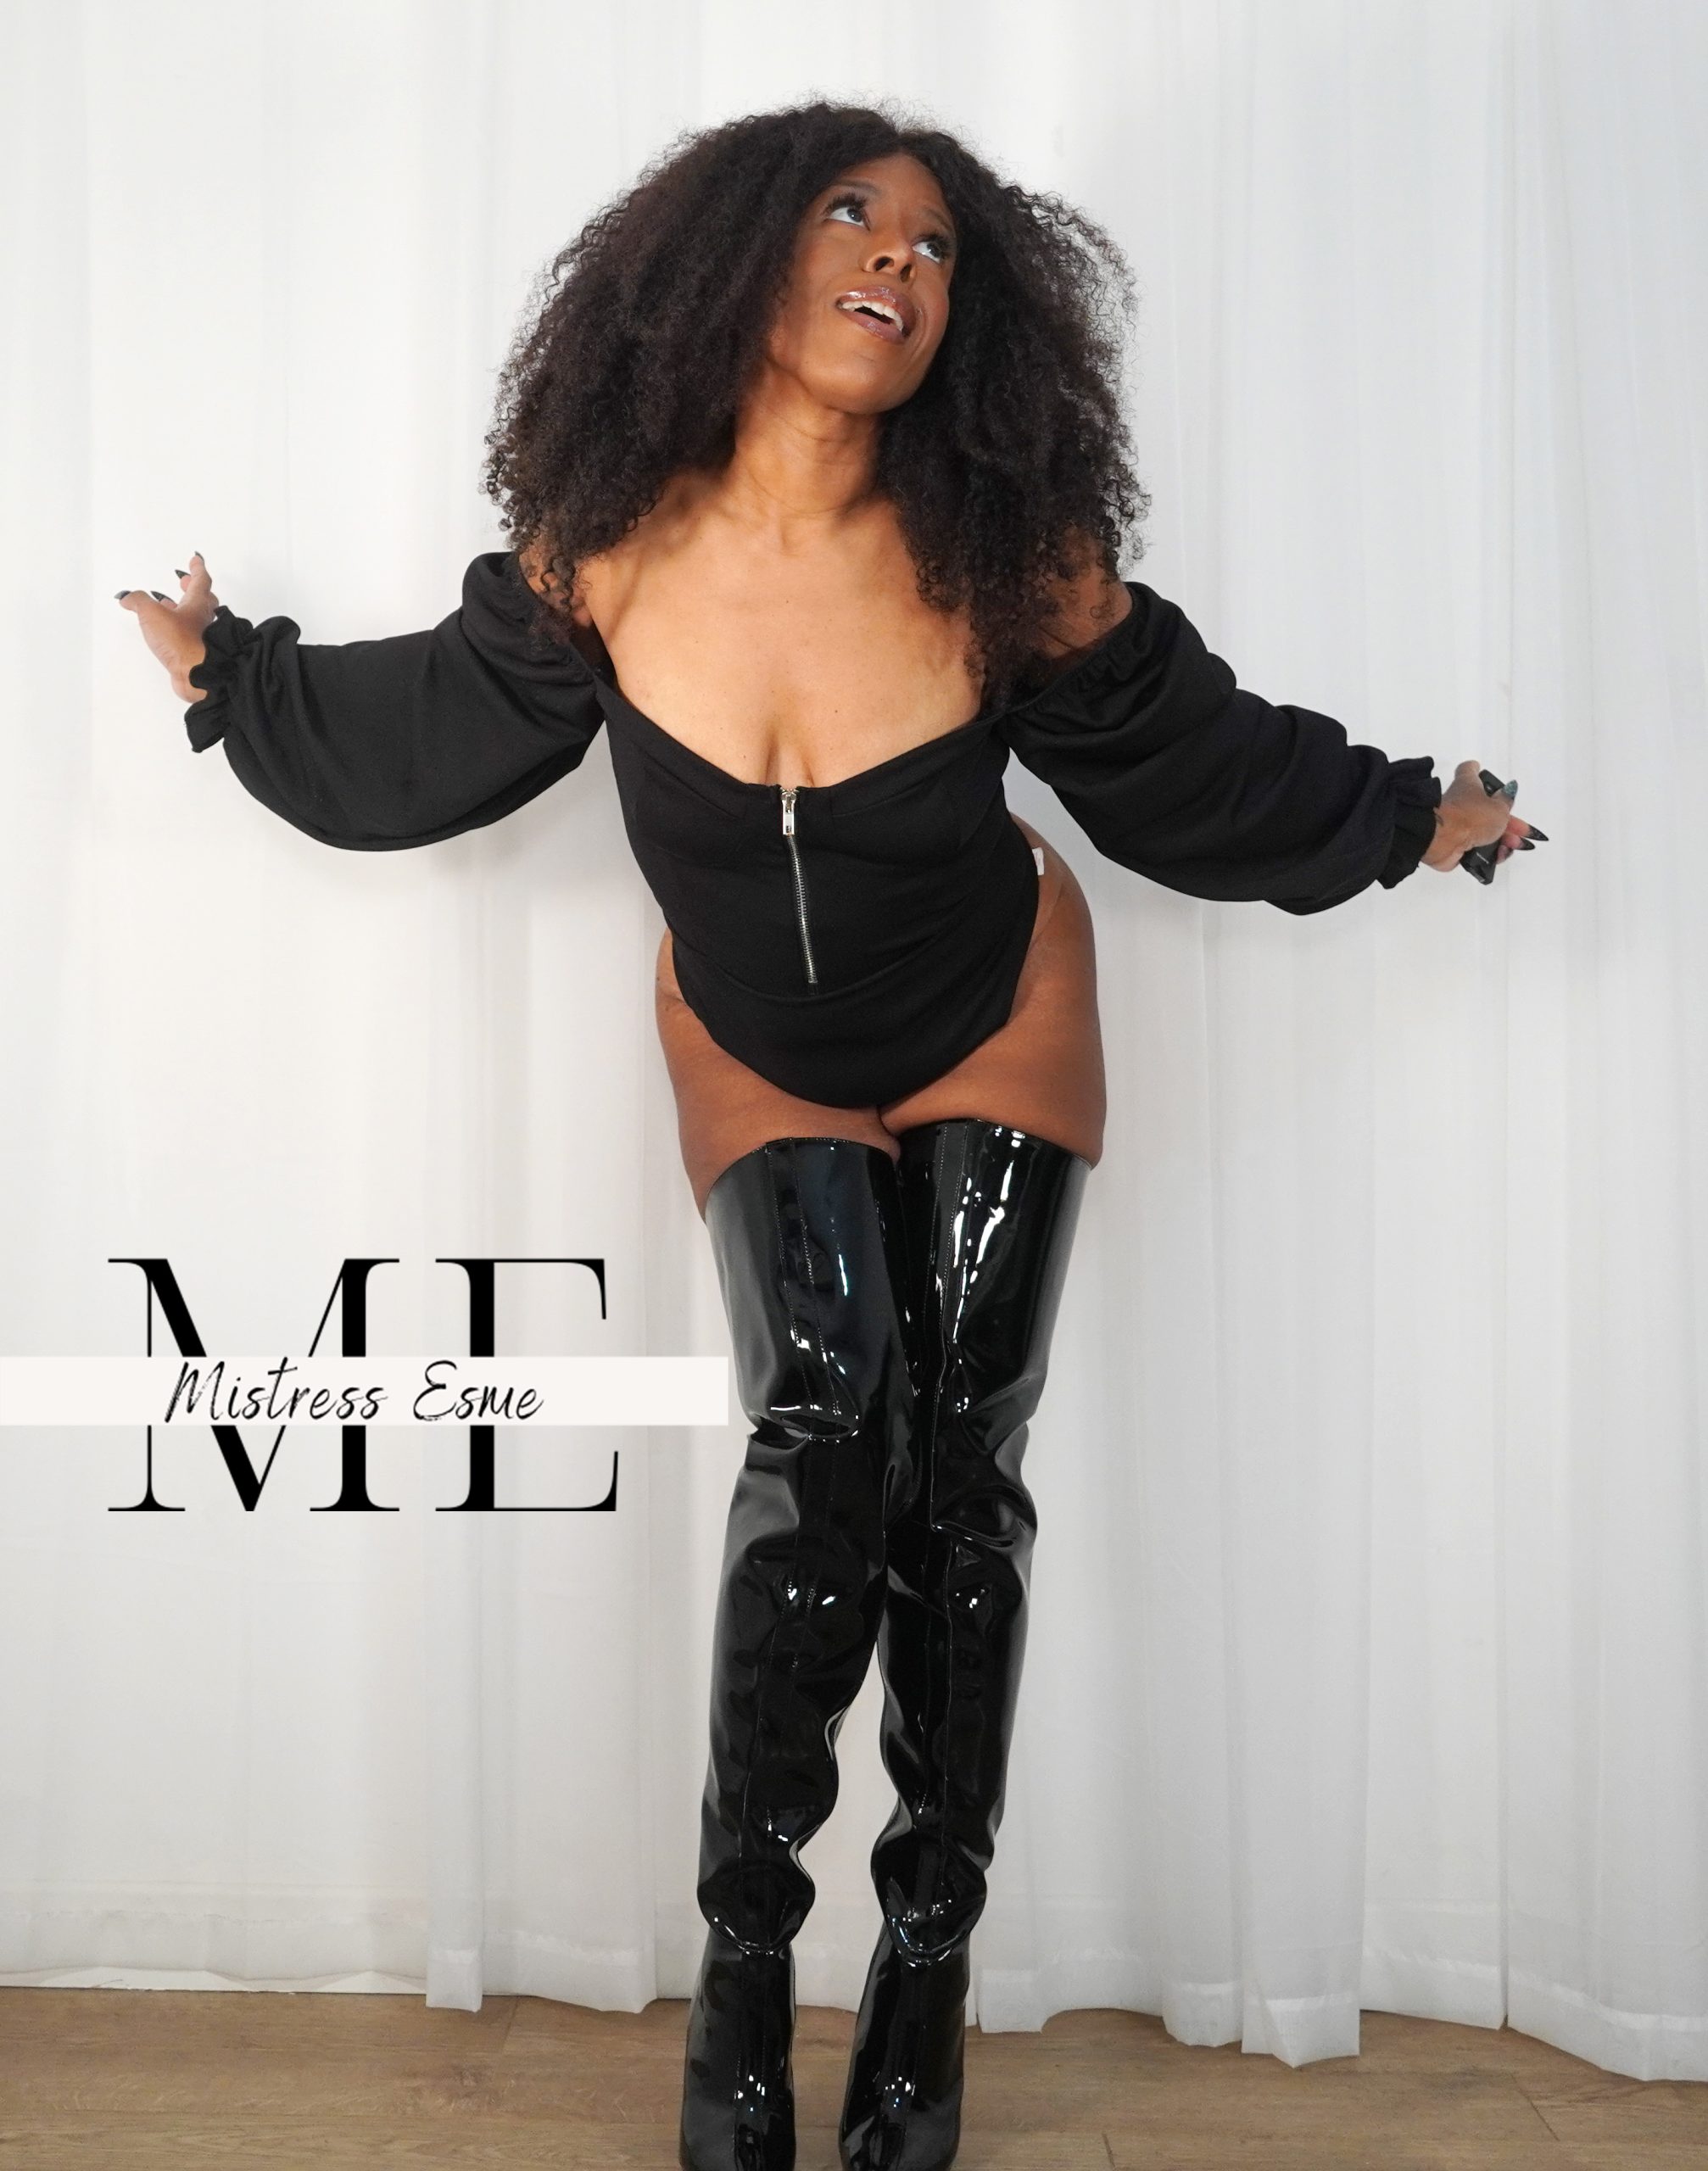 Mistress Esme is in a black bodysuit with long sleeves and black pvc thigh high boots. She has her arms wide open and is looking up with a smile on her face as if she knows something.